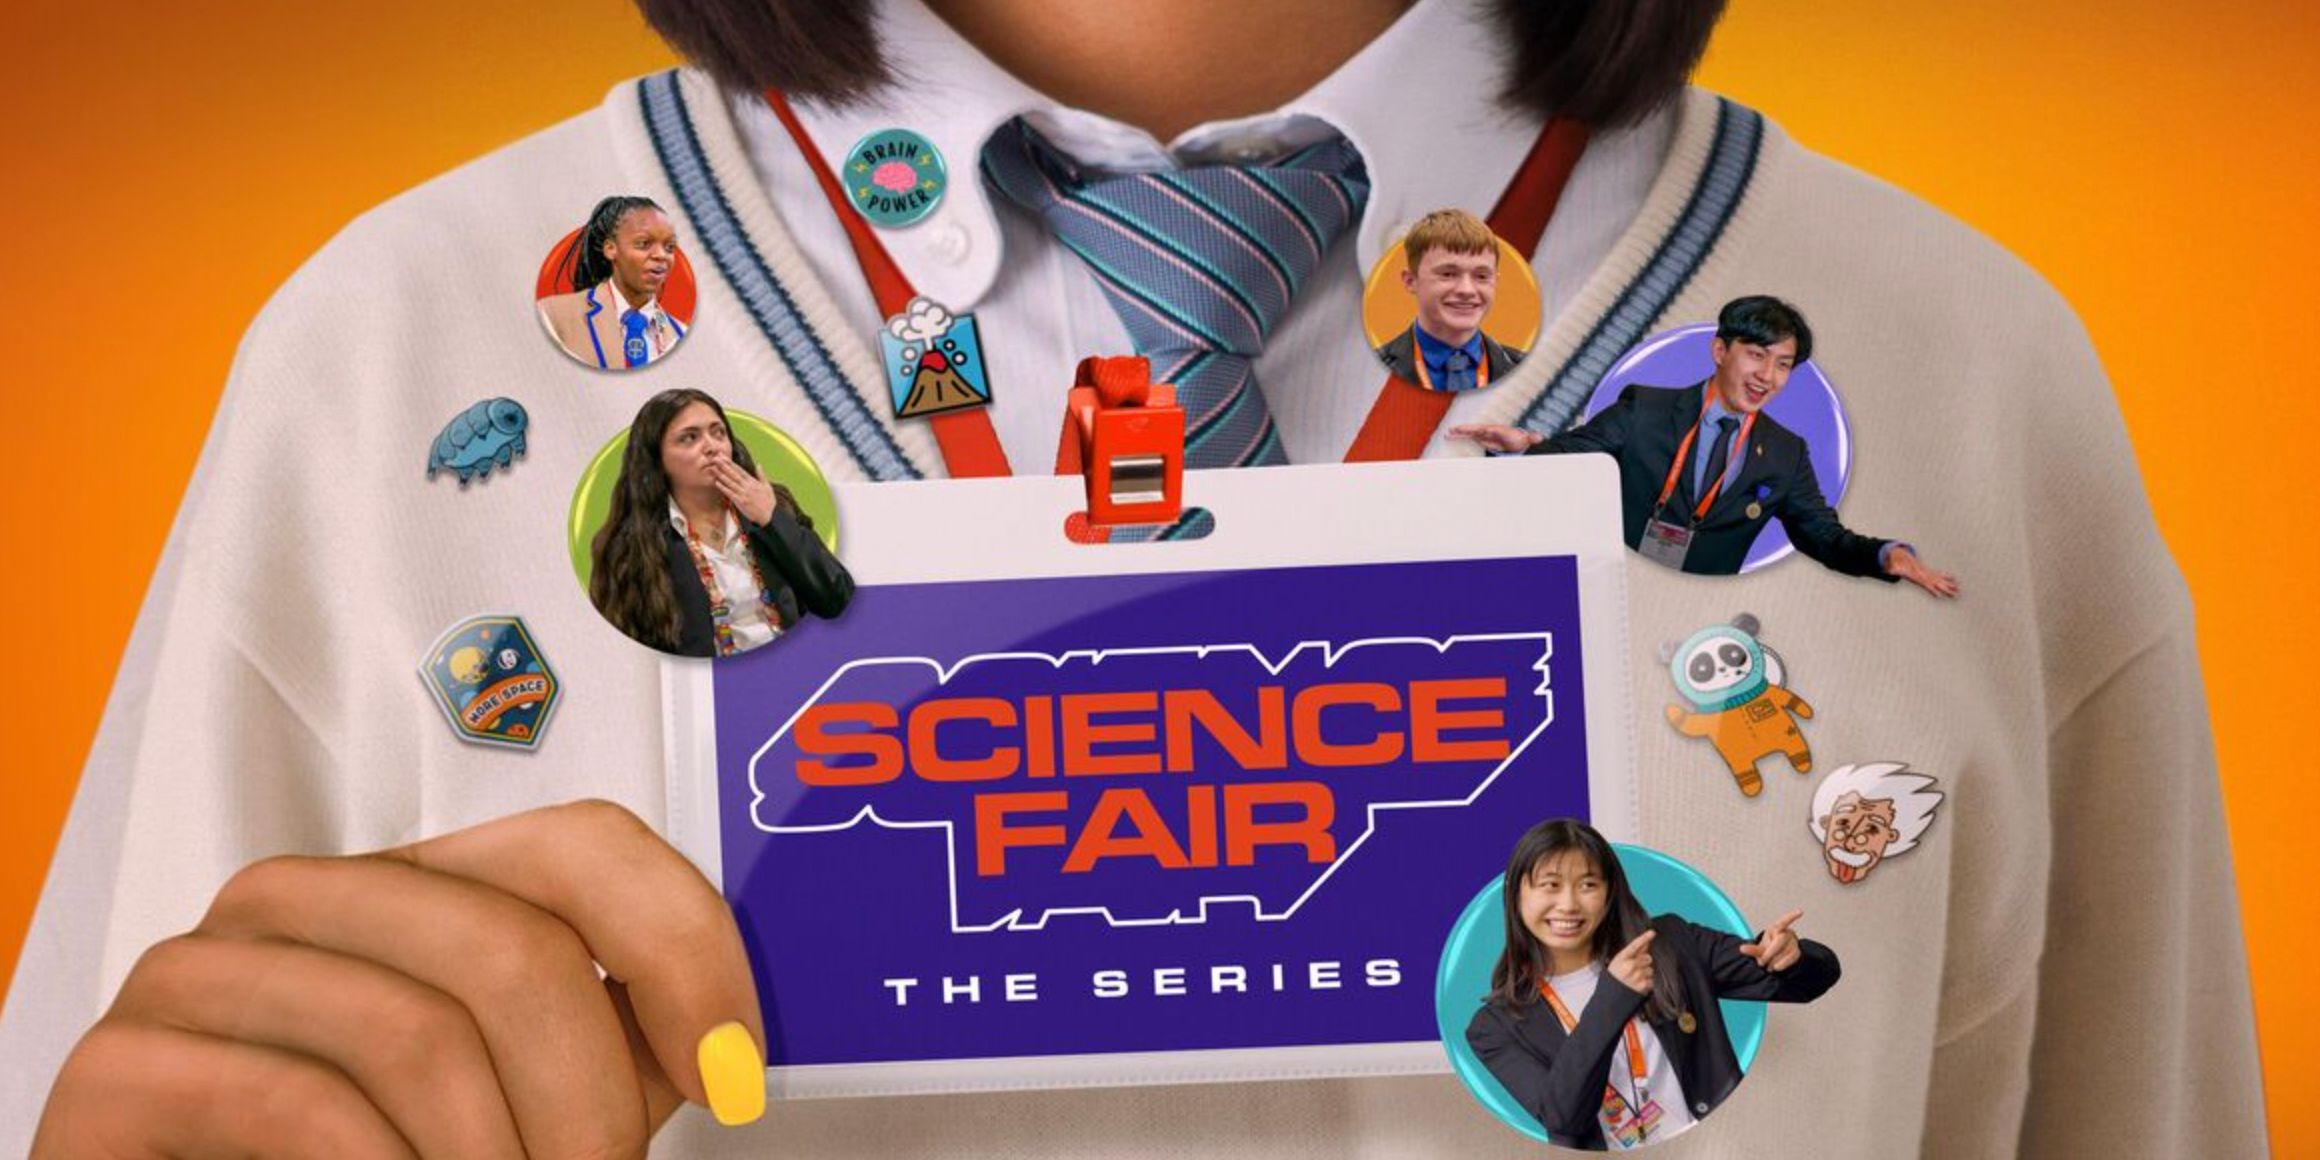 The title card for Science Fair the Series features a card held up in front of a person as an ID badge and several buttons depicting contestants in the show